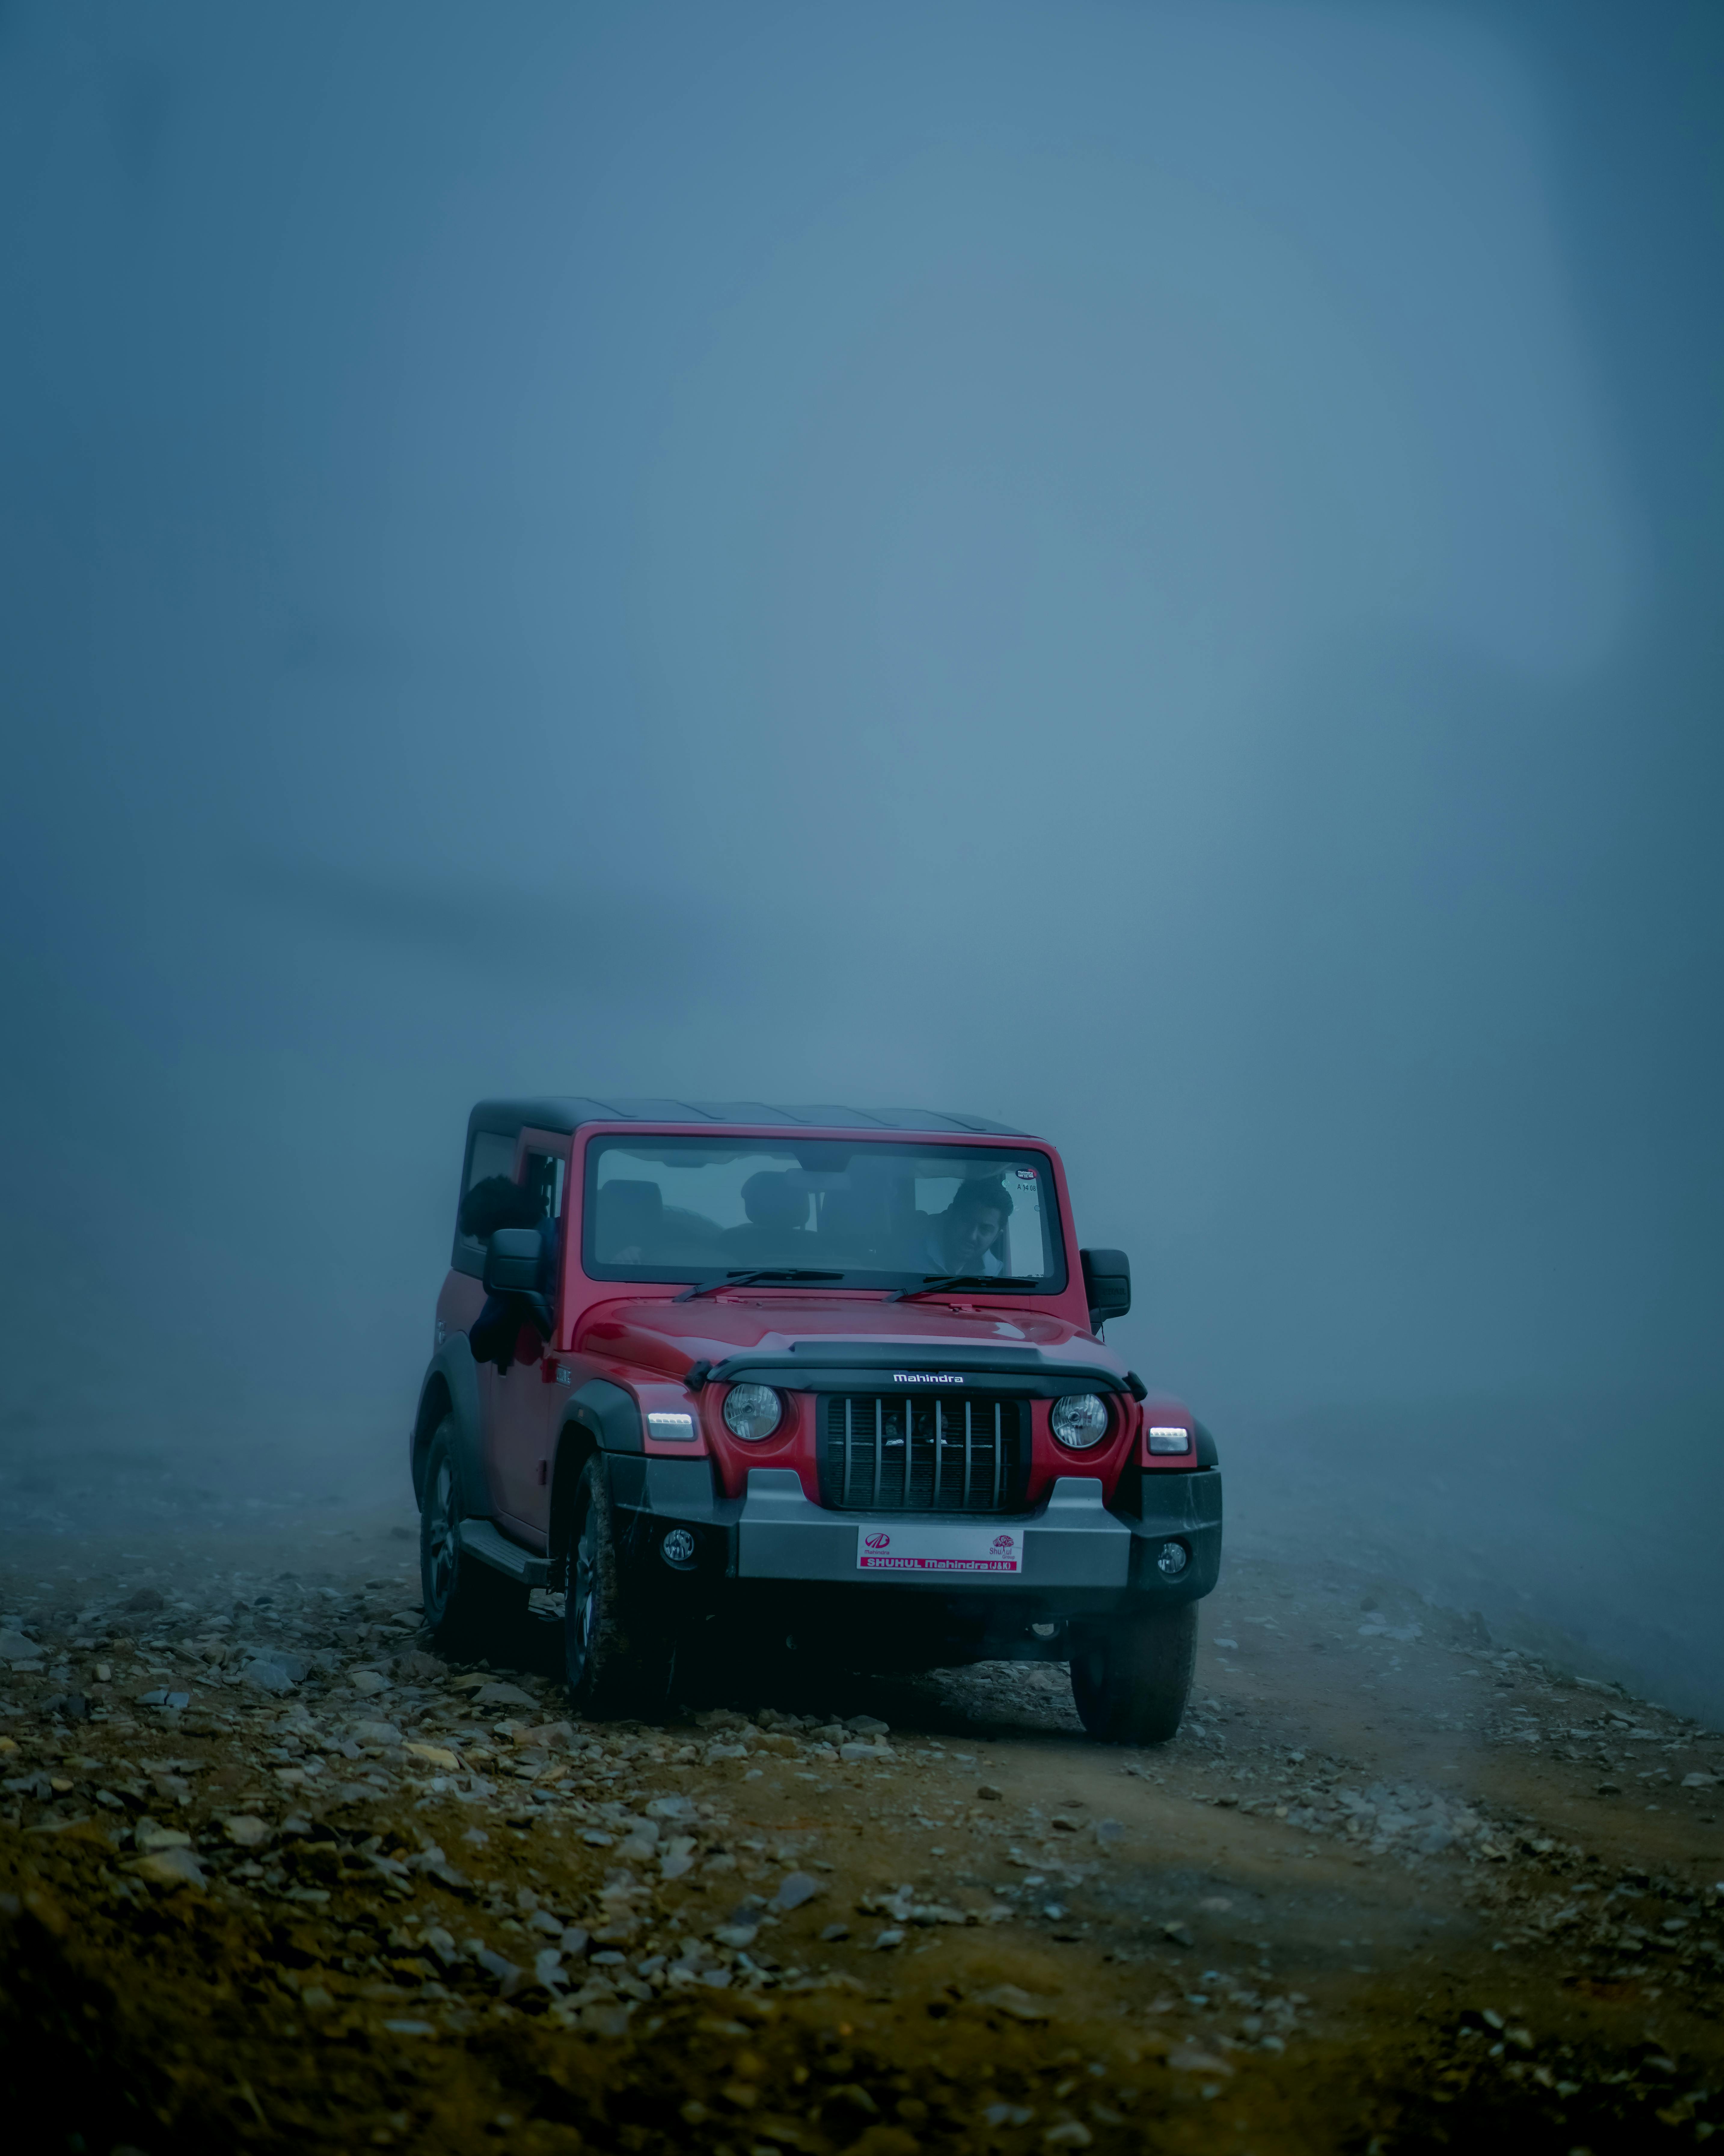 Thar Photos, Download The BEST Free Thar Stock Photos & HD Images